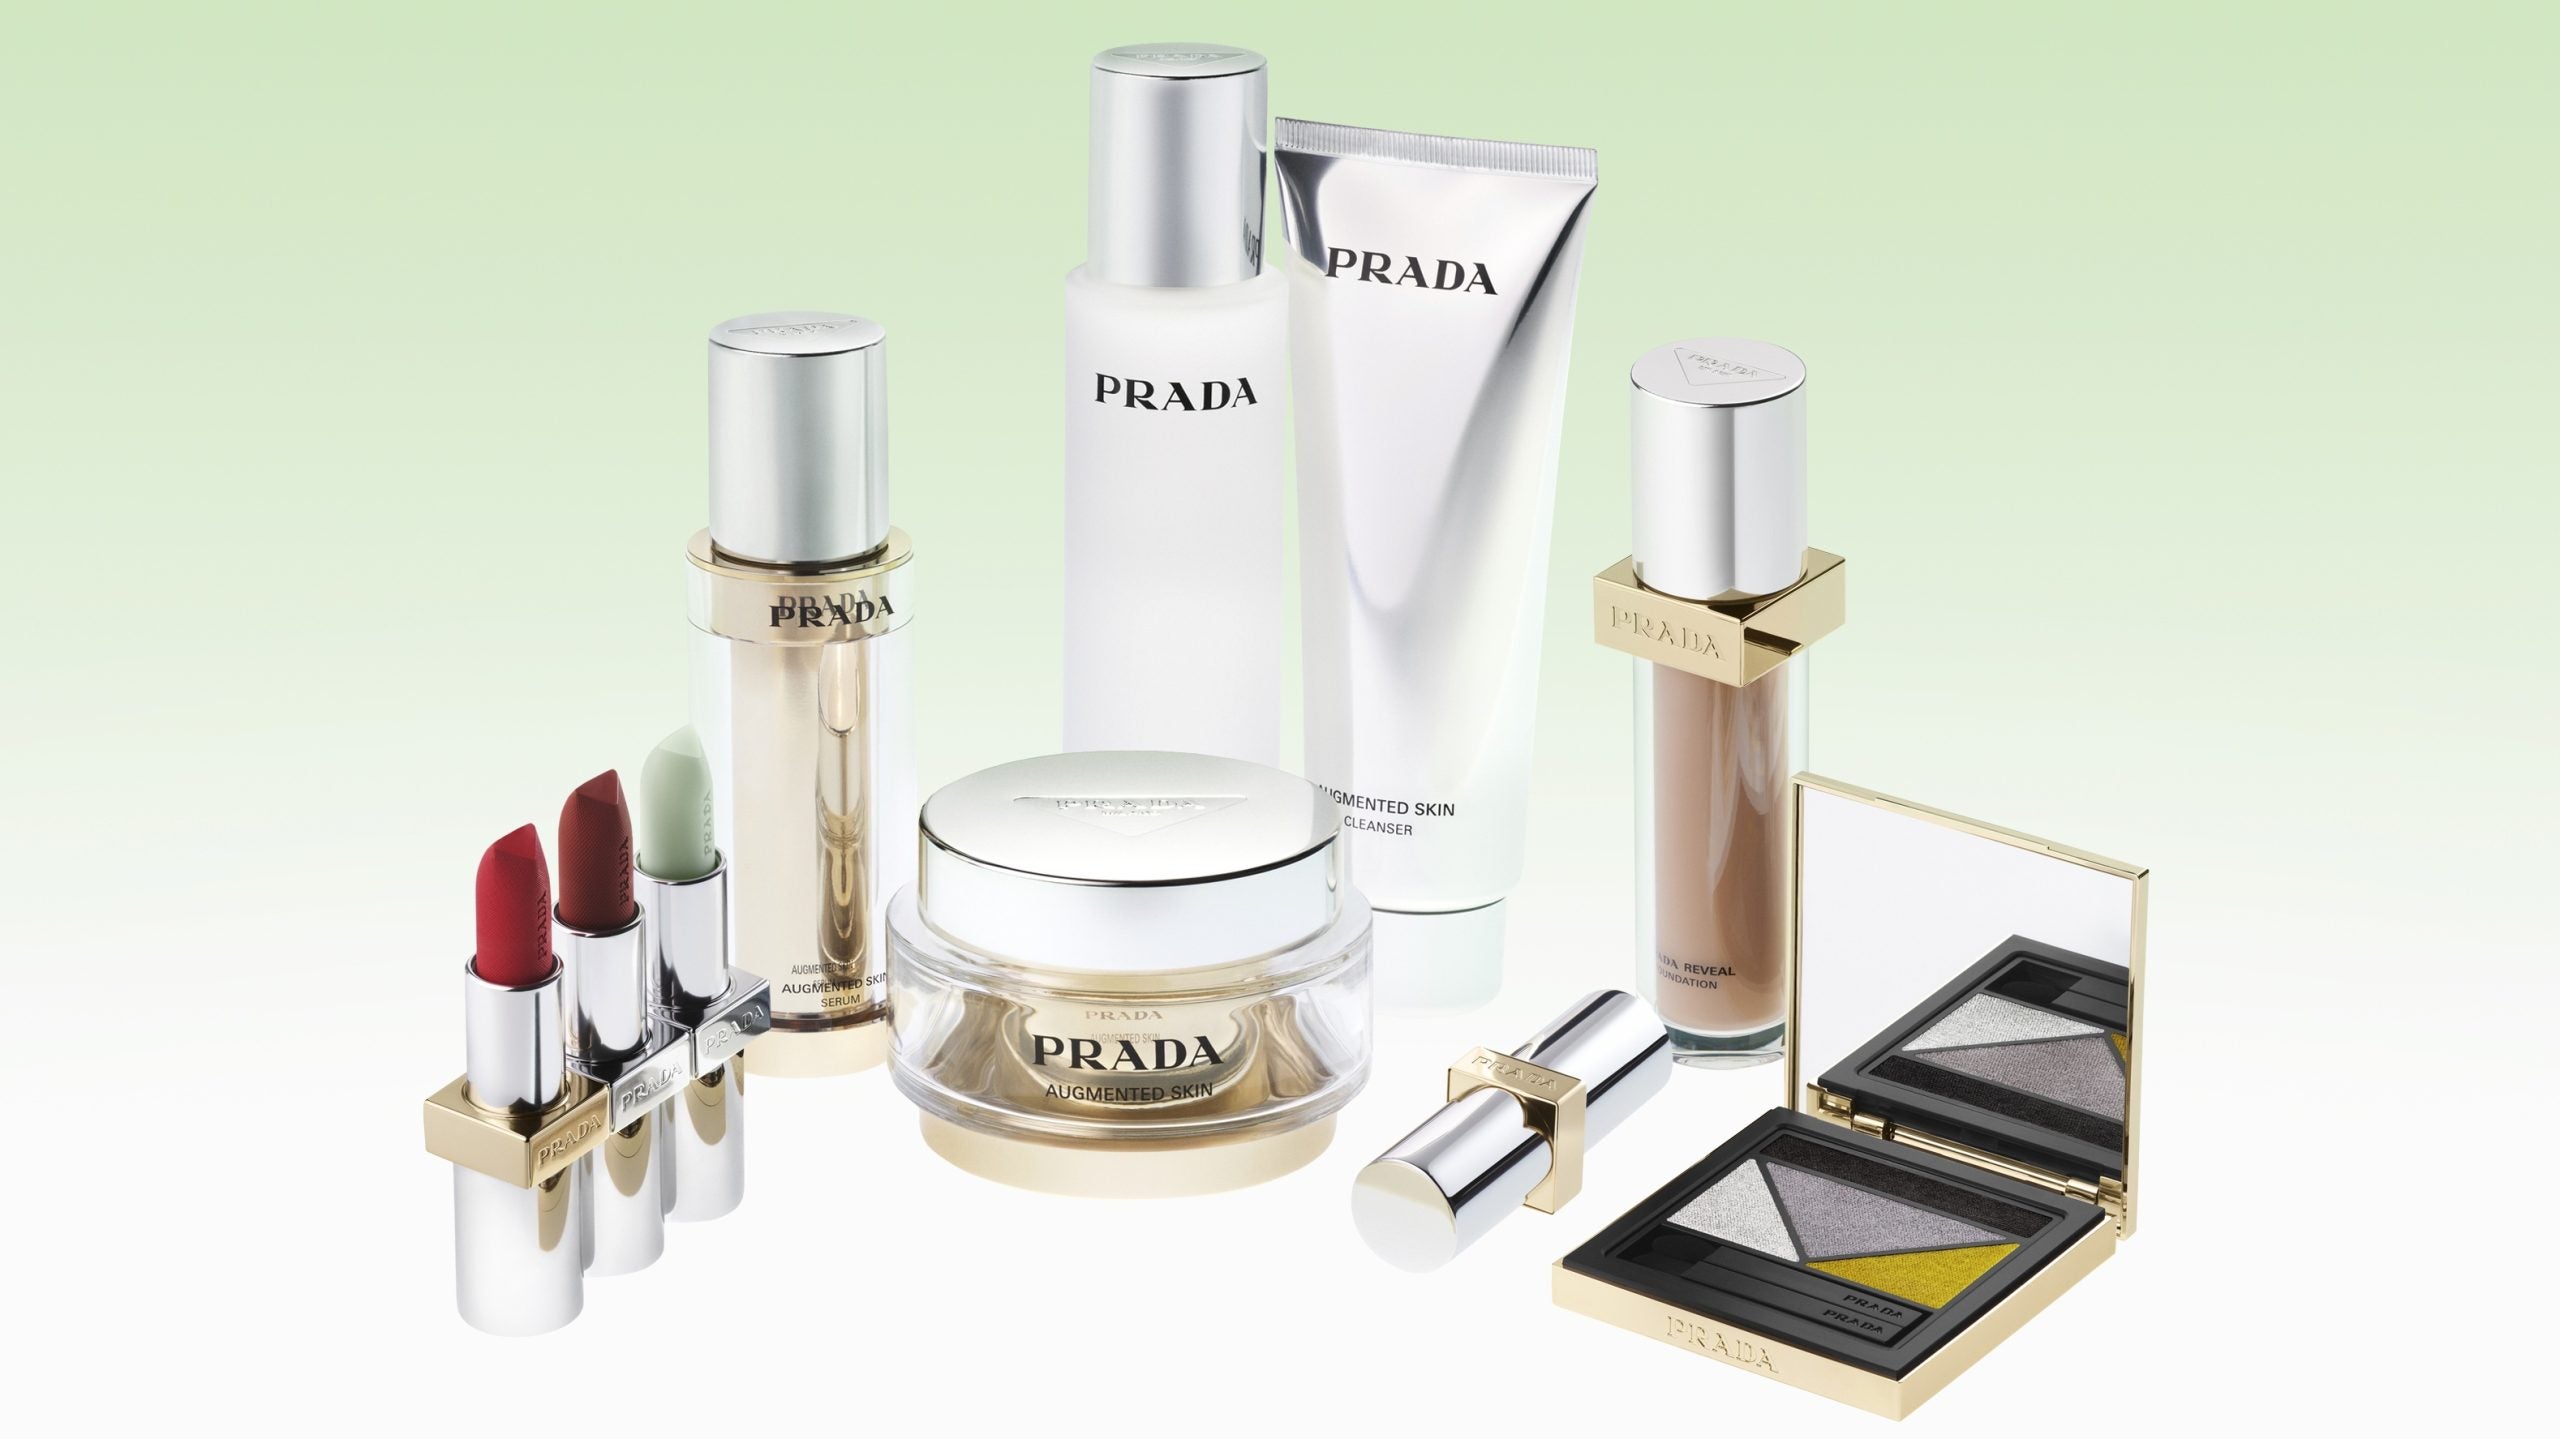 PRADA Launches New Skincare Collection Exclusively At Nordstrom